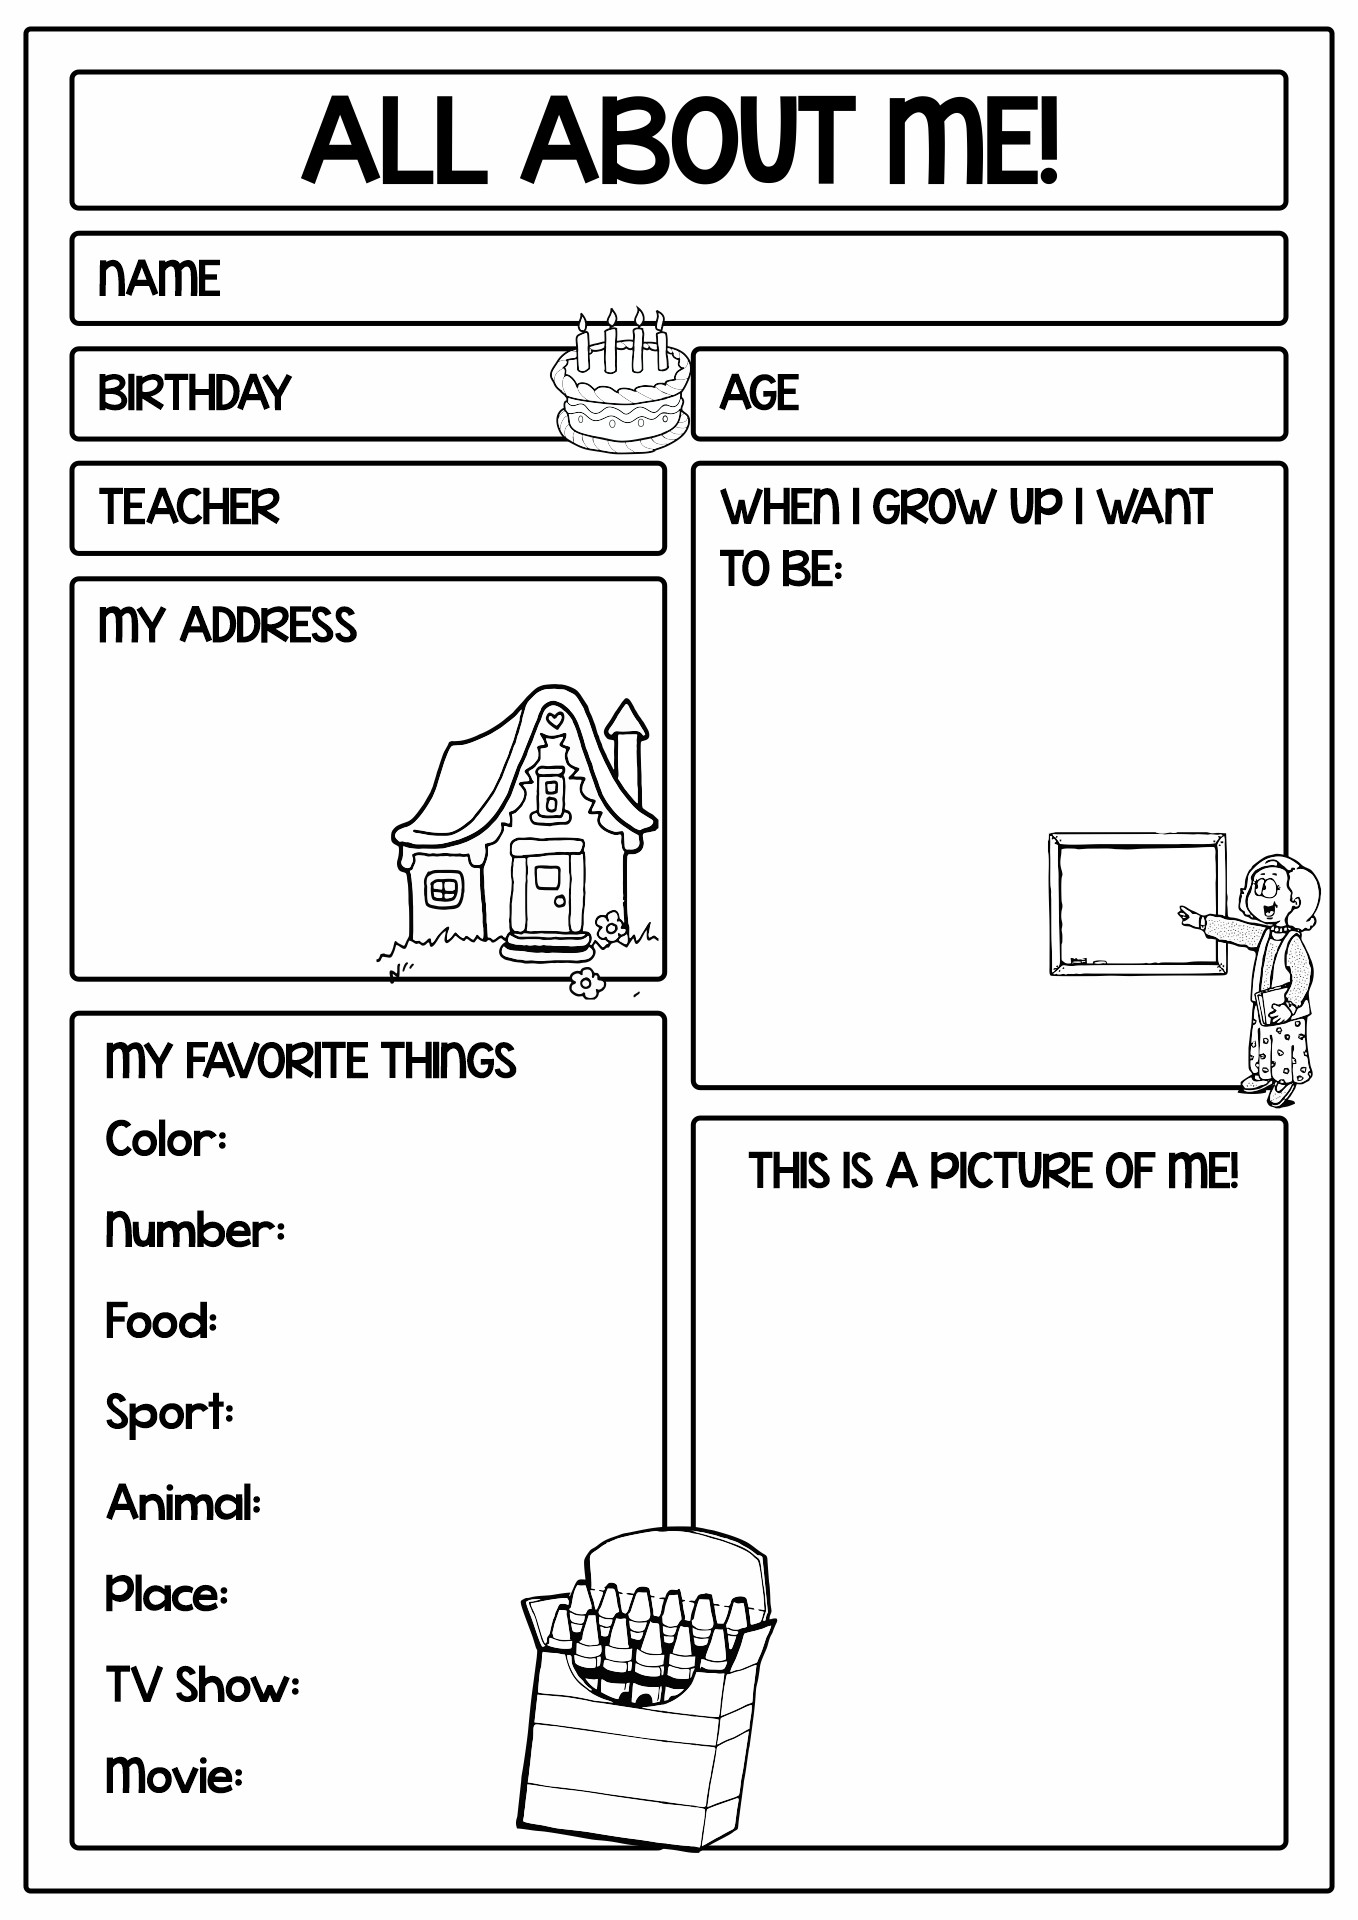 All About Me School Worksheet